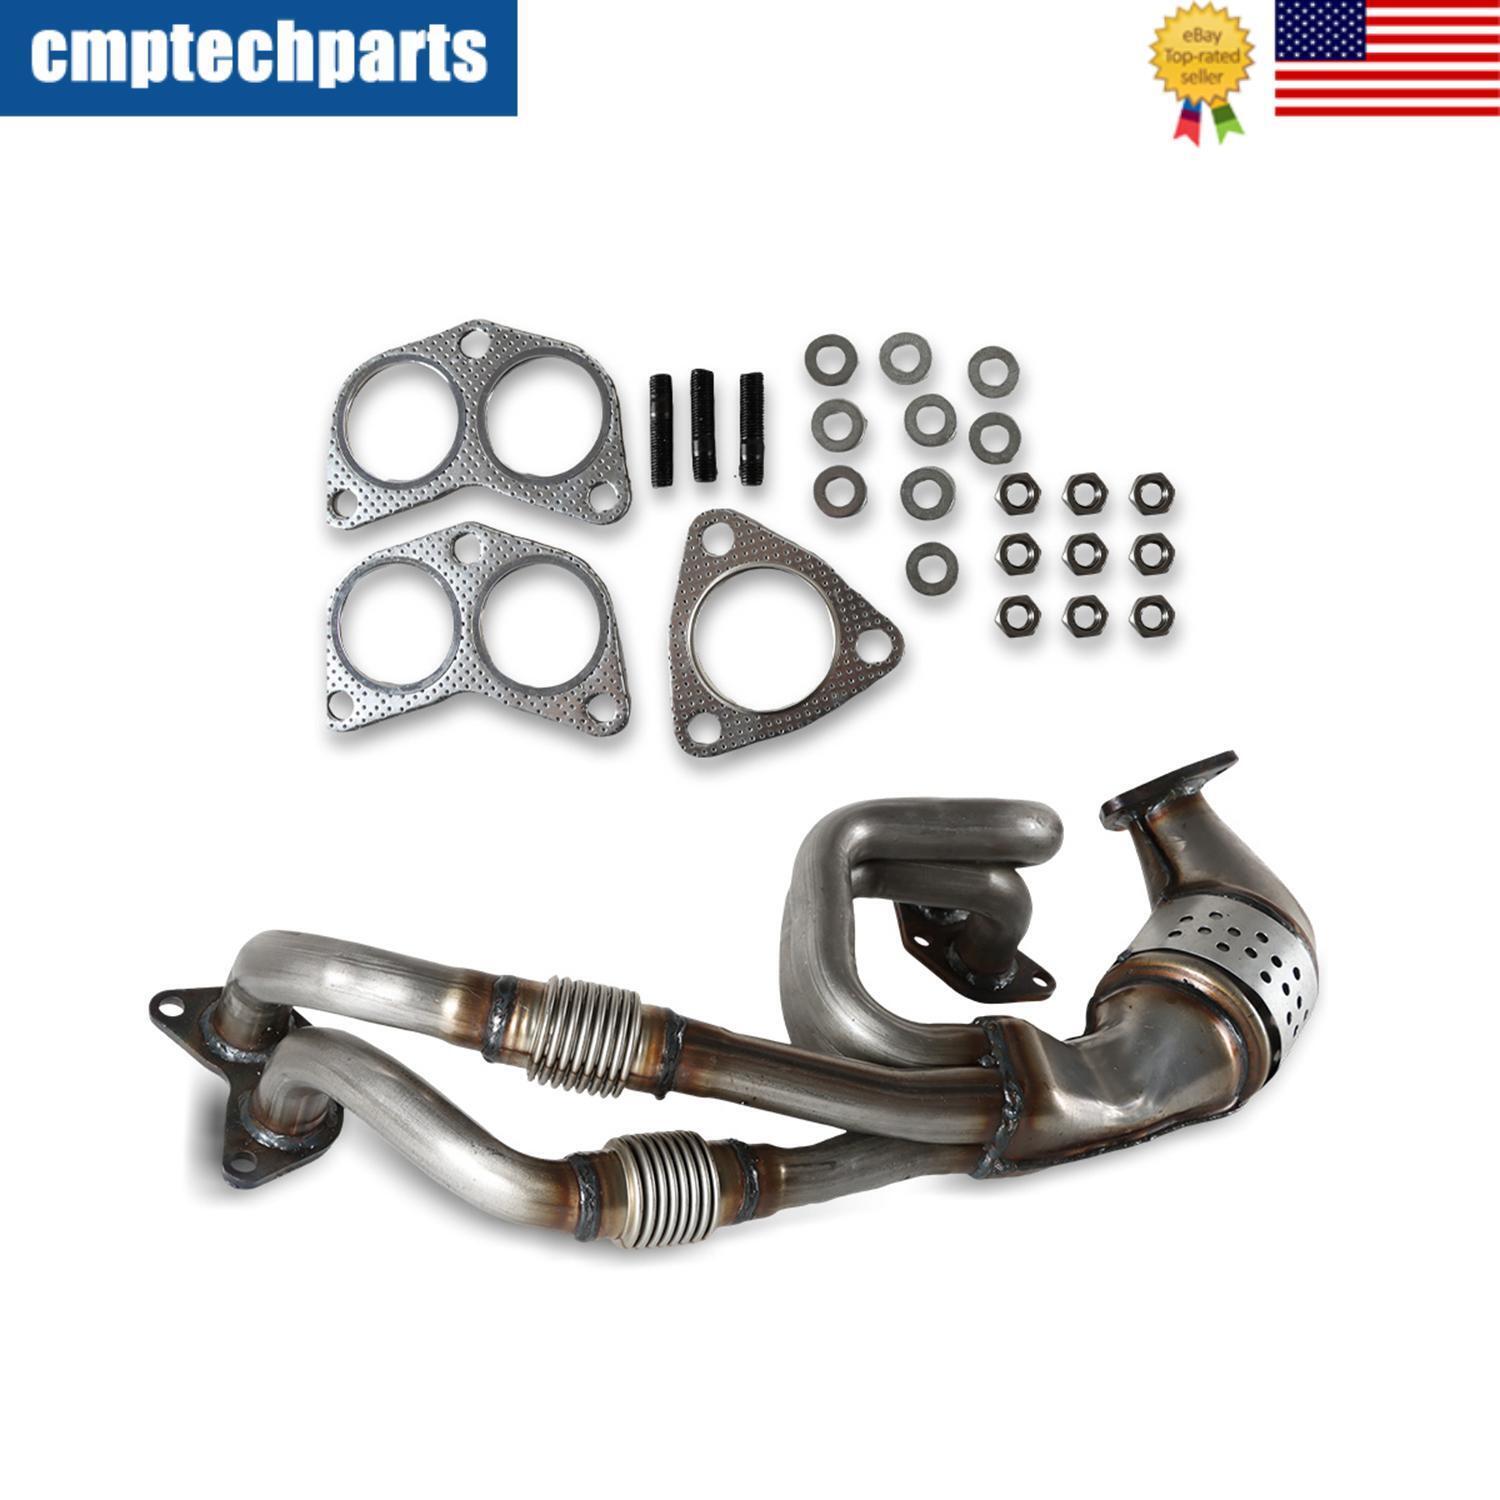 Front Exhaust Manifold Catalytic Converter w/Gaskets for Subaru Outback 2.5L EPA